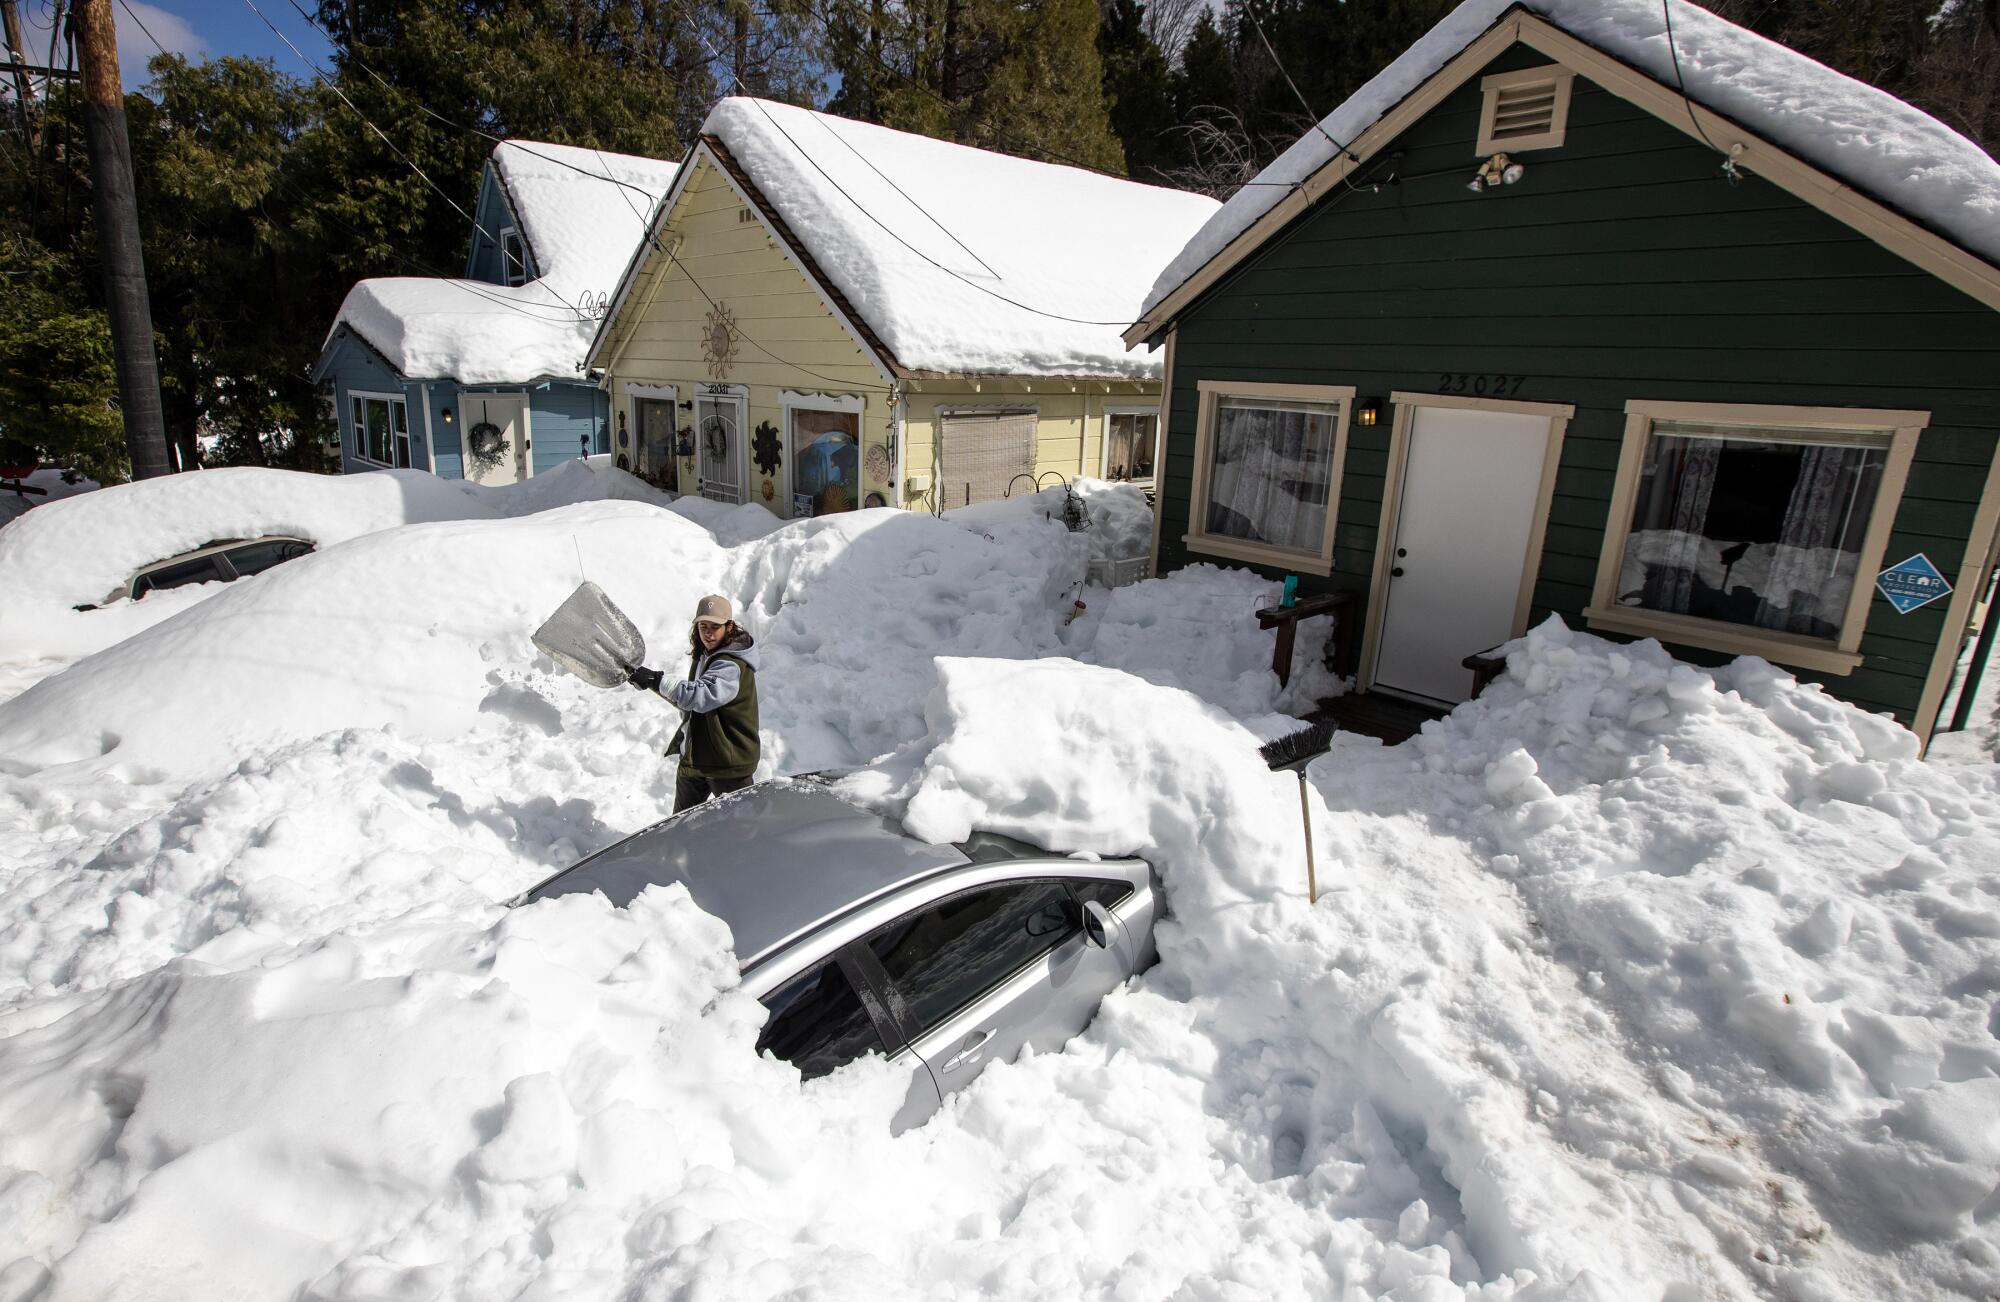 Kadyn Wheat, 14, of Valley of Enchantment shovels a mound of snow on Tuesday